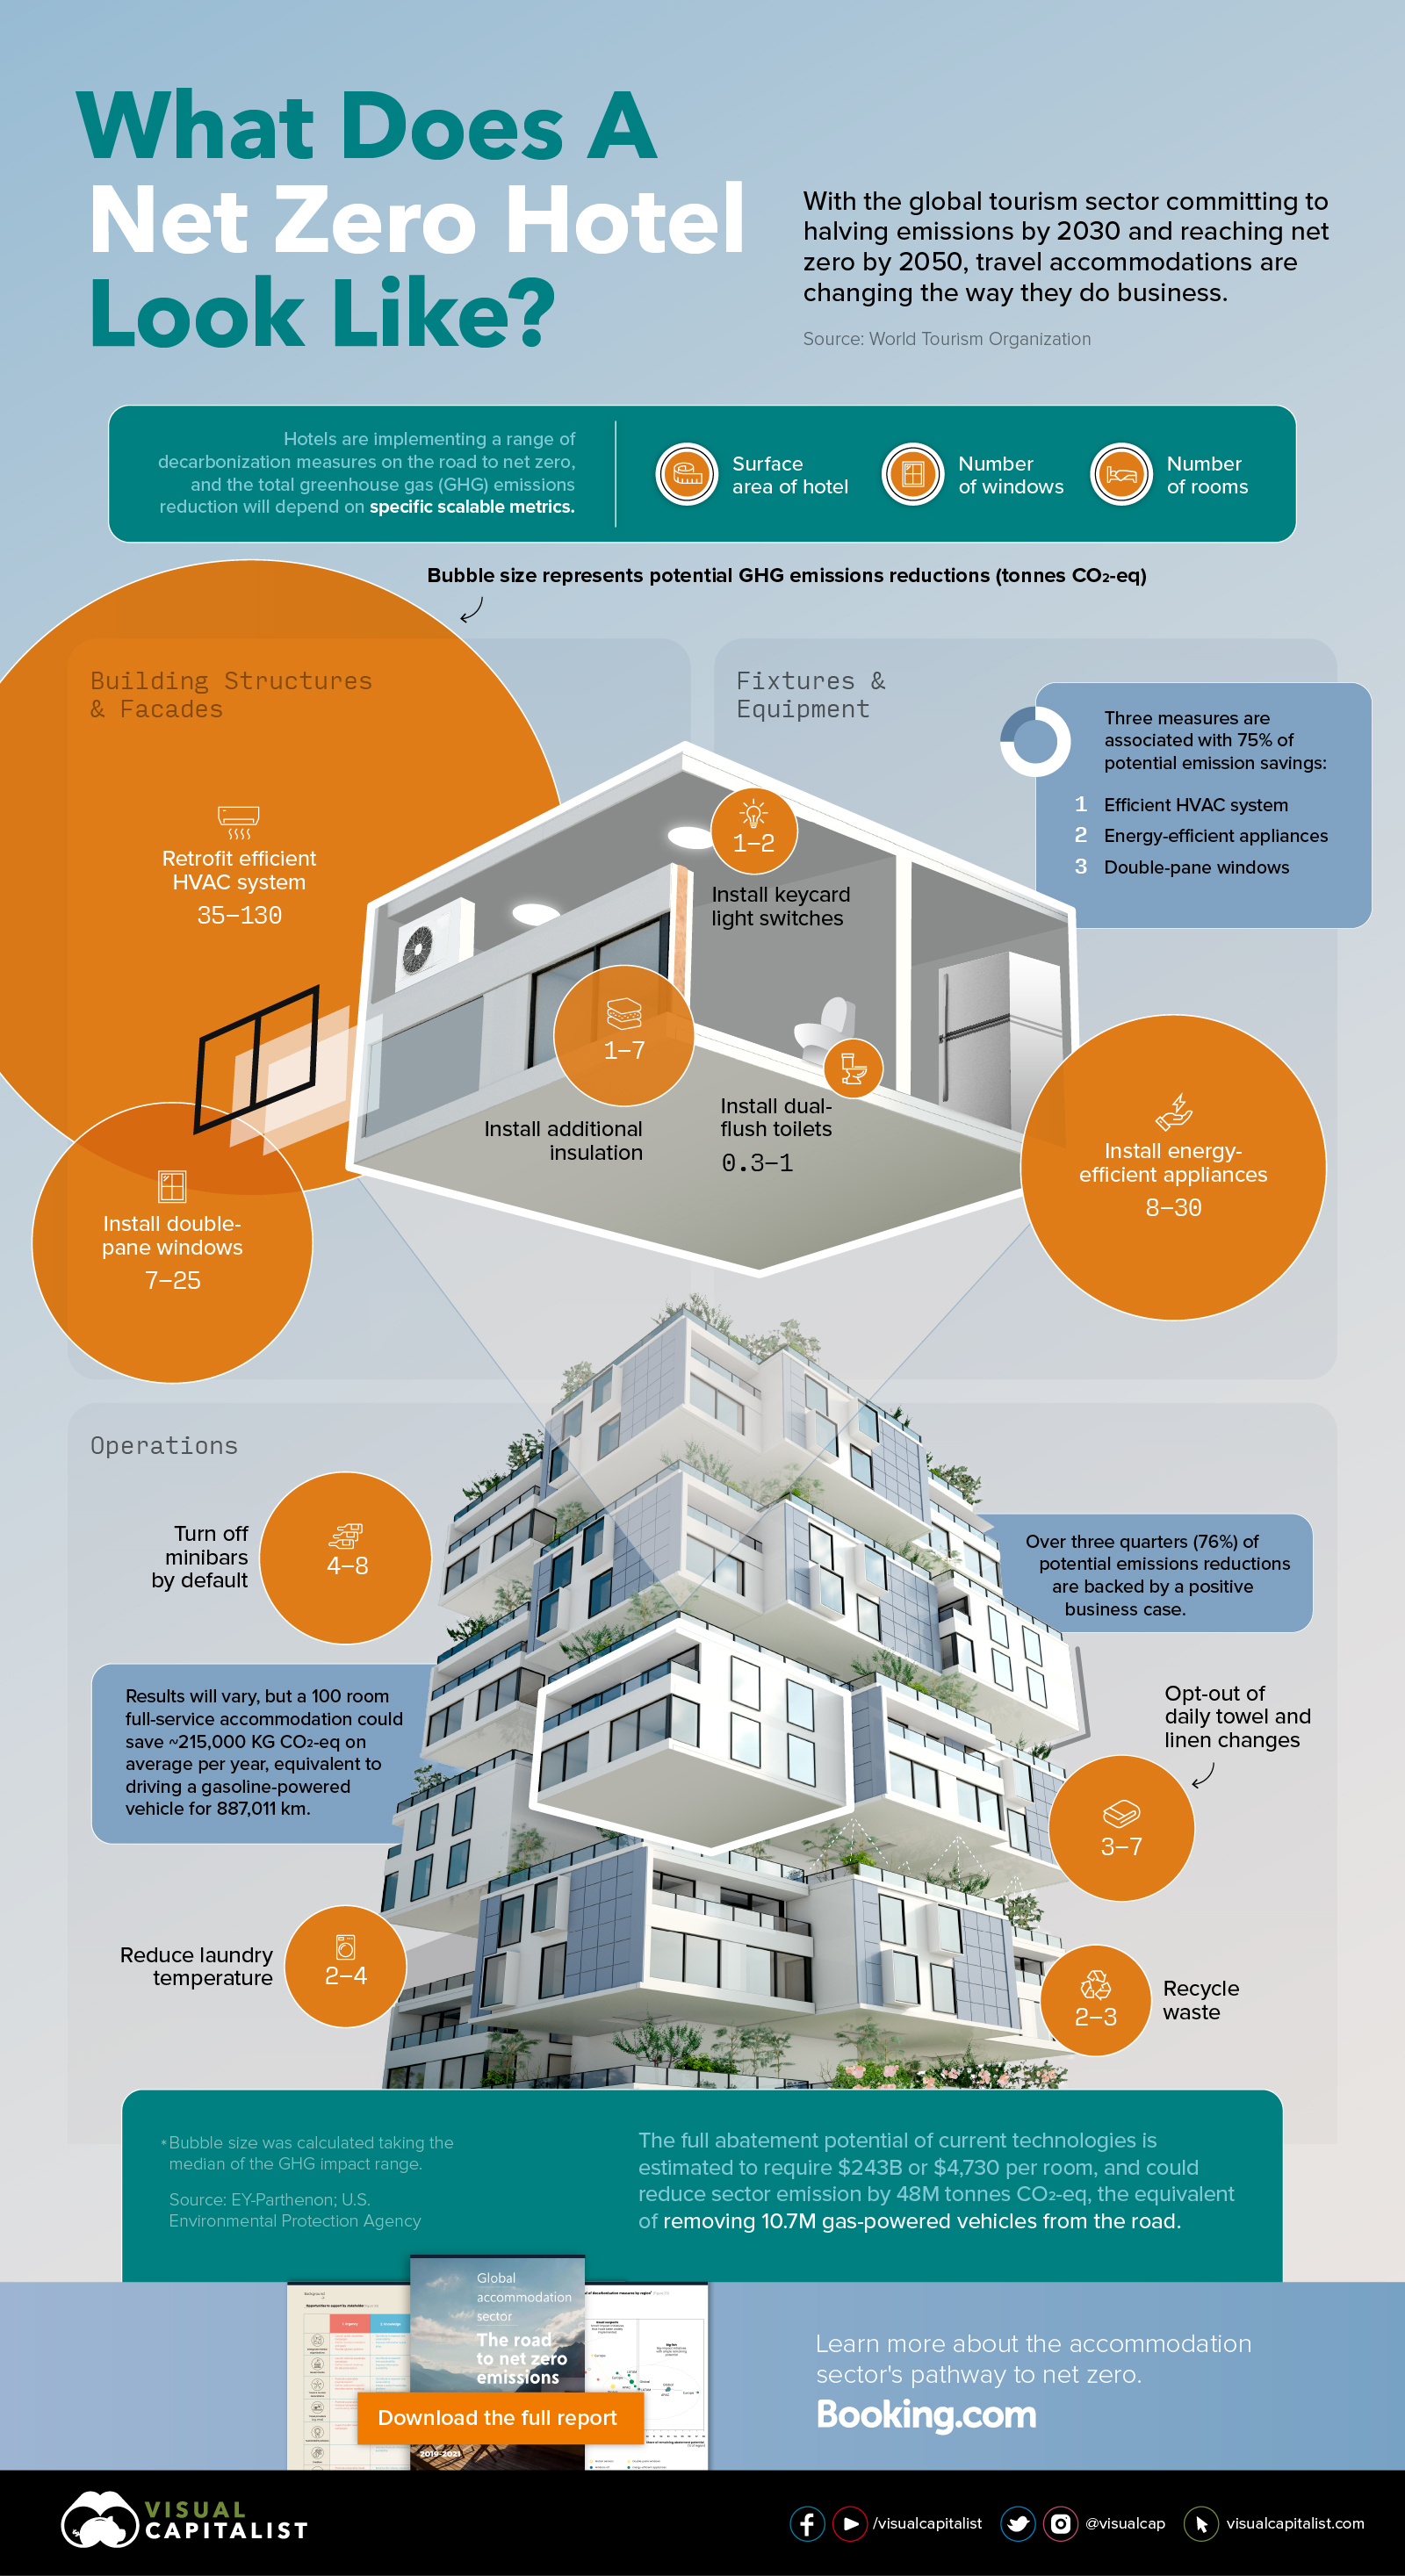 An infographic showing some of the measures that hotels can use to reduce their carbon footprint on their way to net zero.